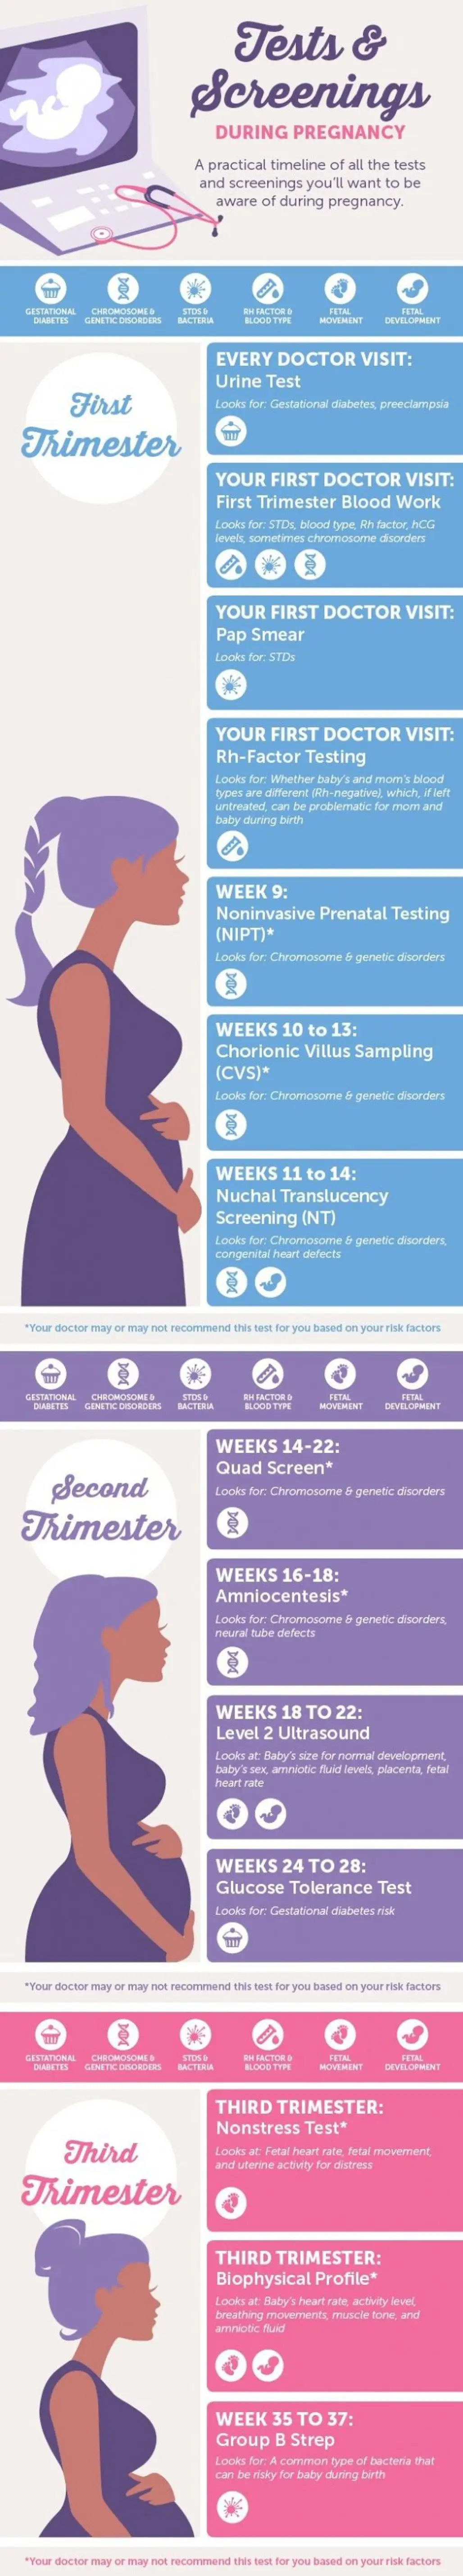 The Main Tests and Screenings during Pregnancy